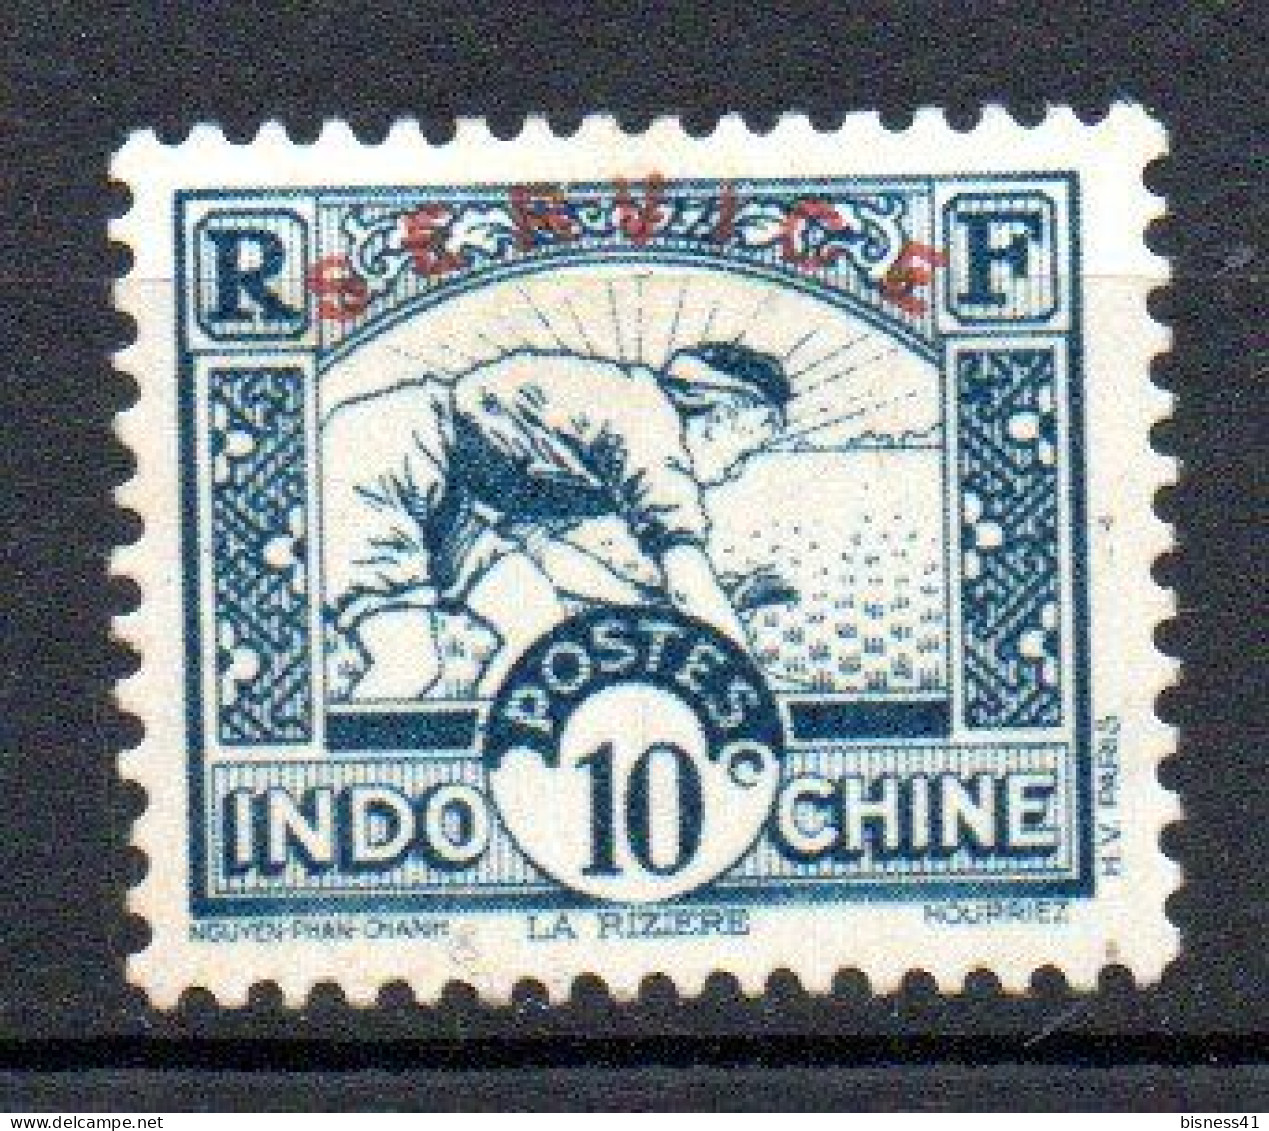 Col33 Colonie Indochine Service N° 7 Neuf X MH Cote : 1,25€ - Postage Due